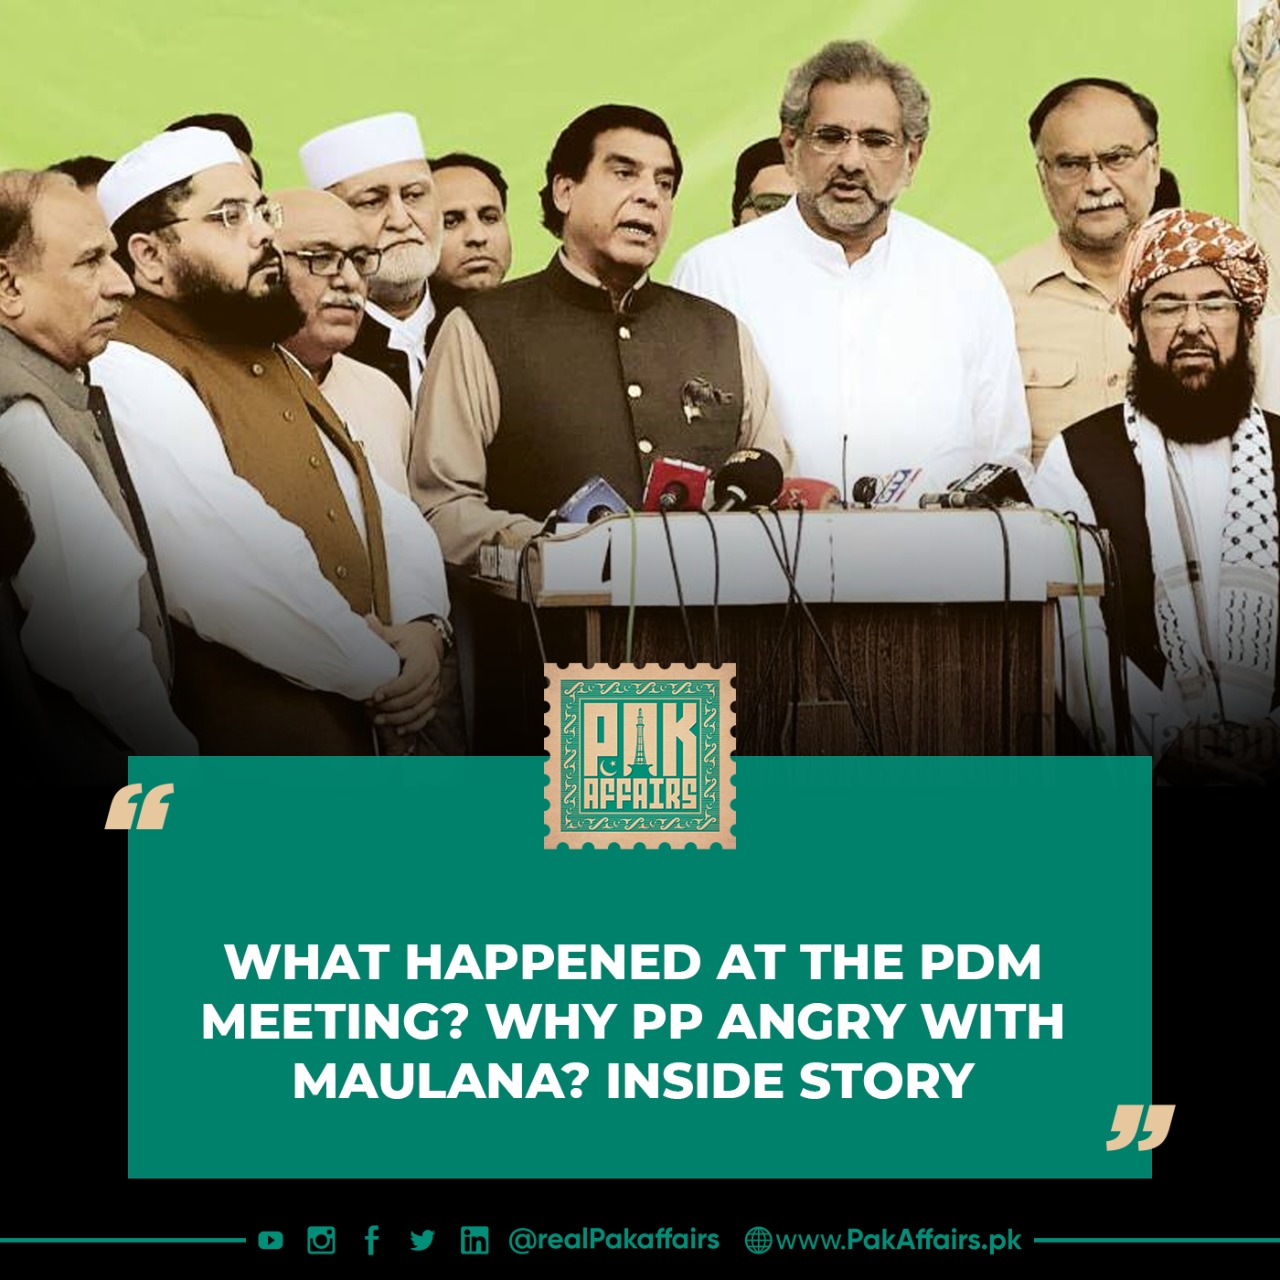 What happened at the PDM meeting? Why is PP angry with Maulana? Inside story